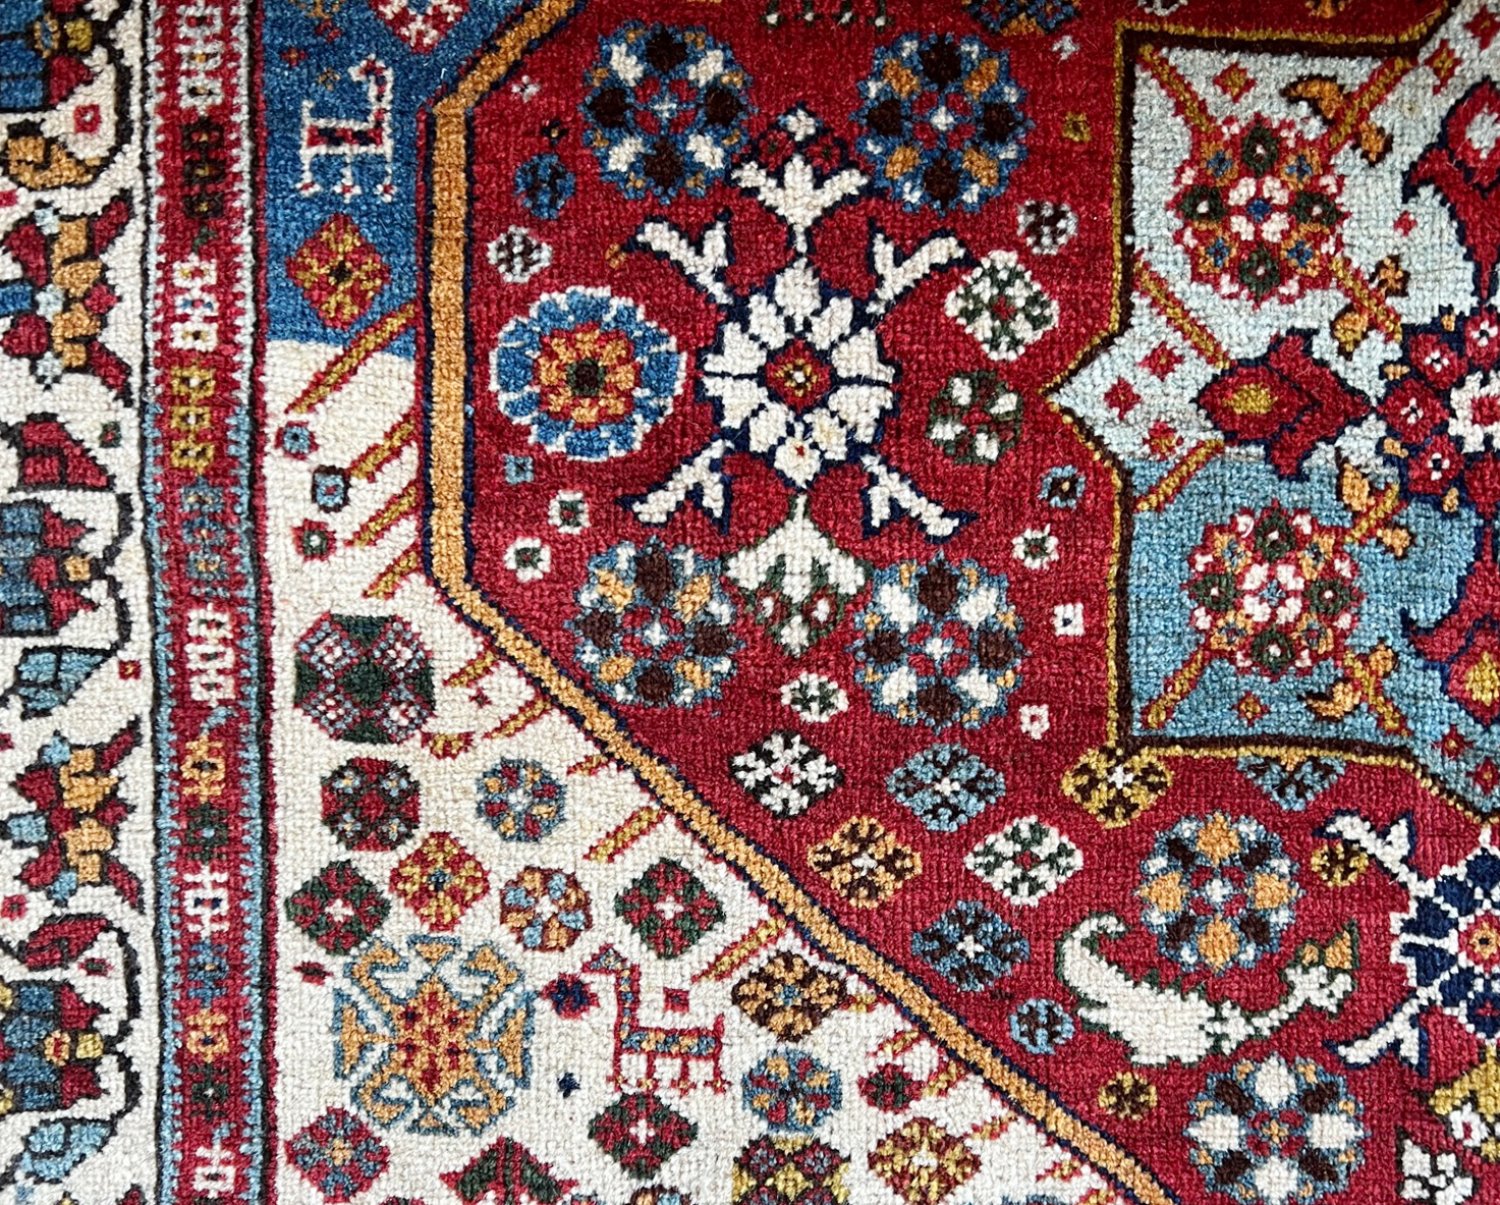 Qashqa’i rug from southern Persia, 